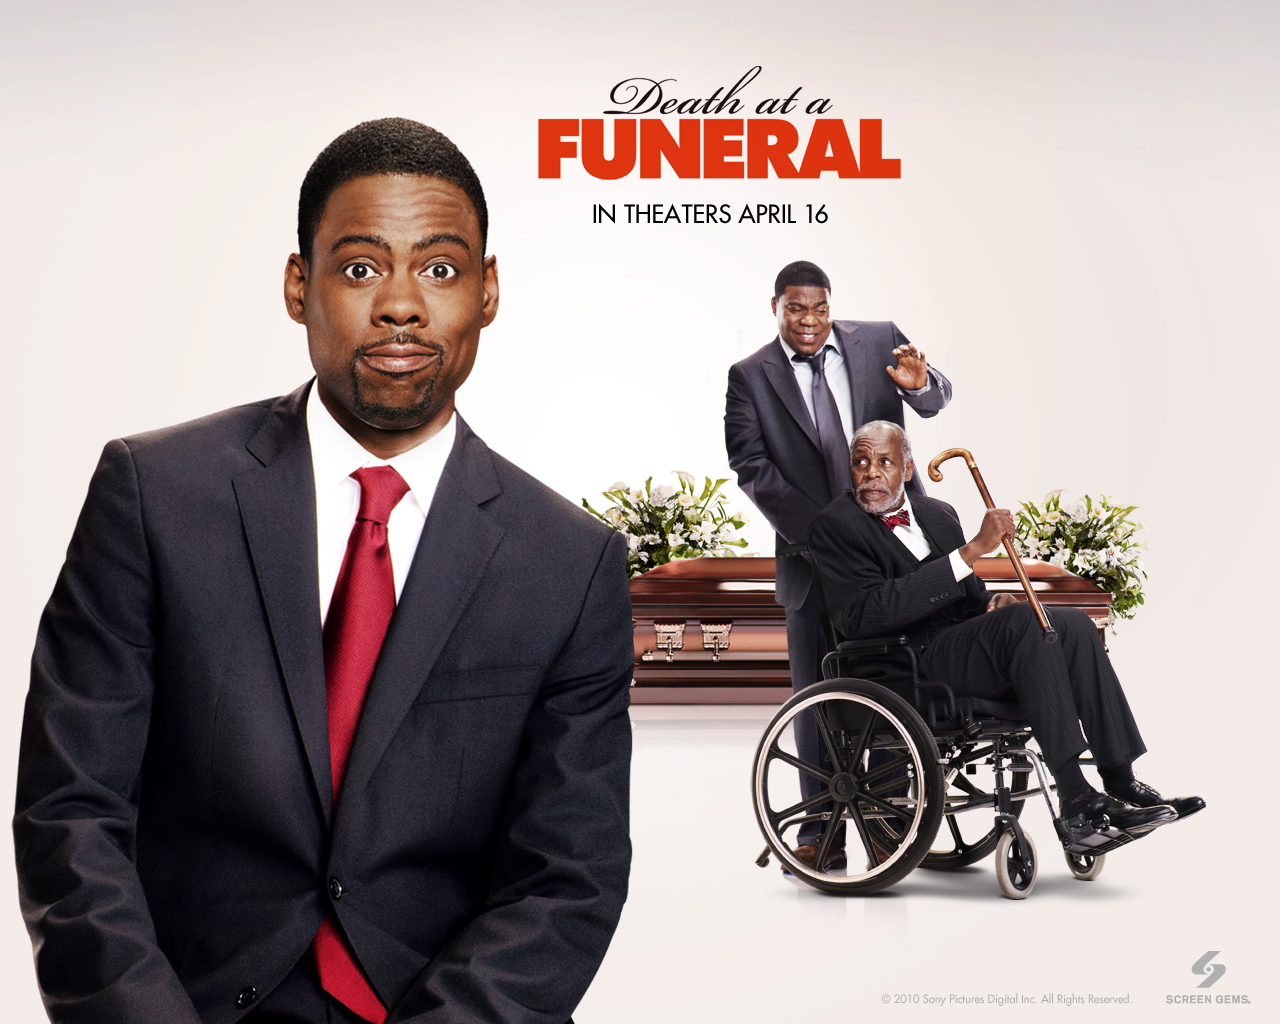 Hd Wallpapers Chris Rock In Death At A Funeral - Chris Rock Death At A Funeral , HD Wallpaper & Backgrounds